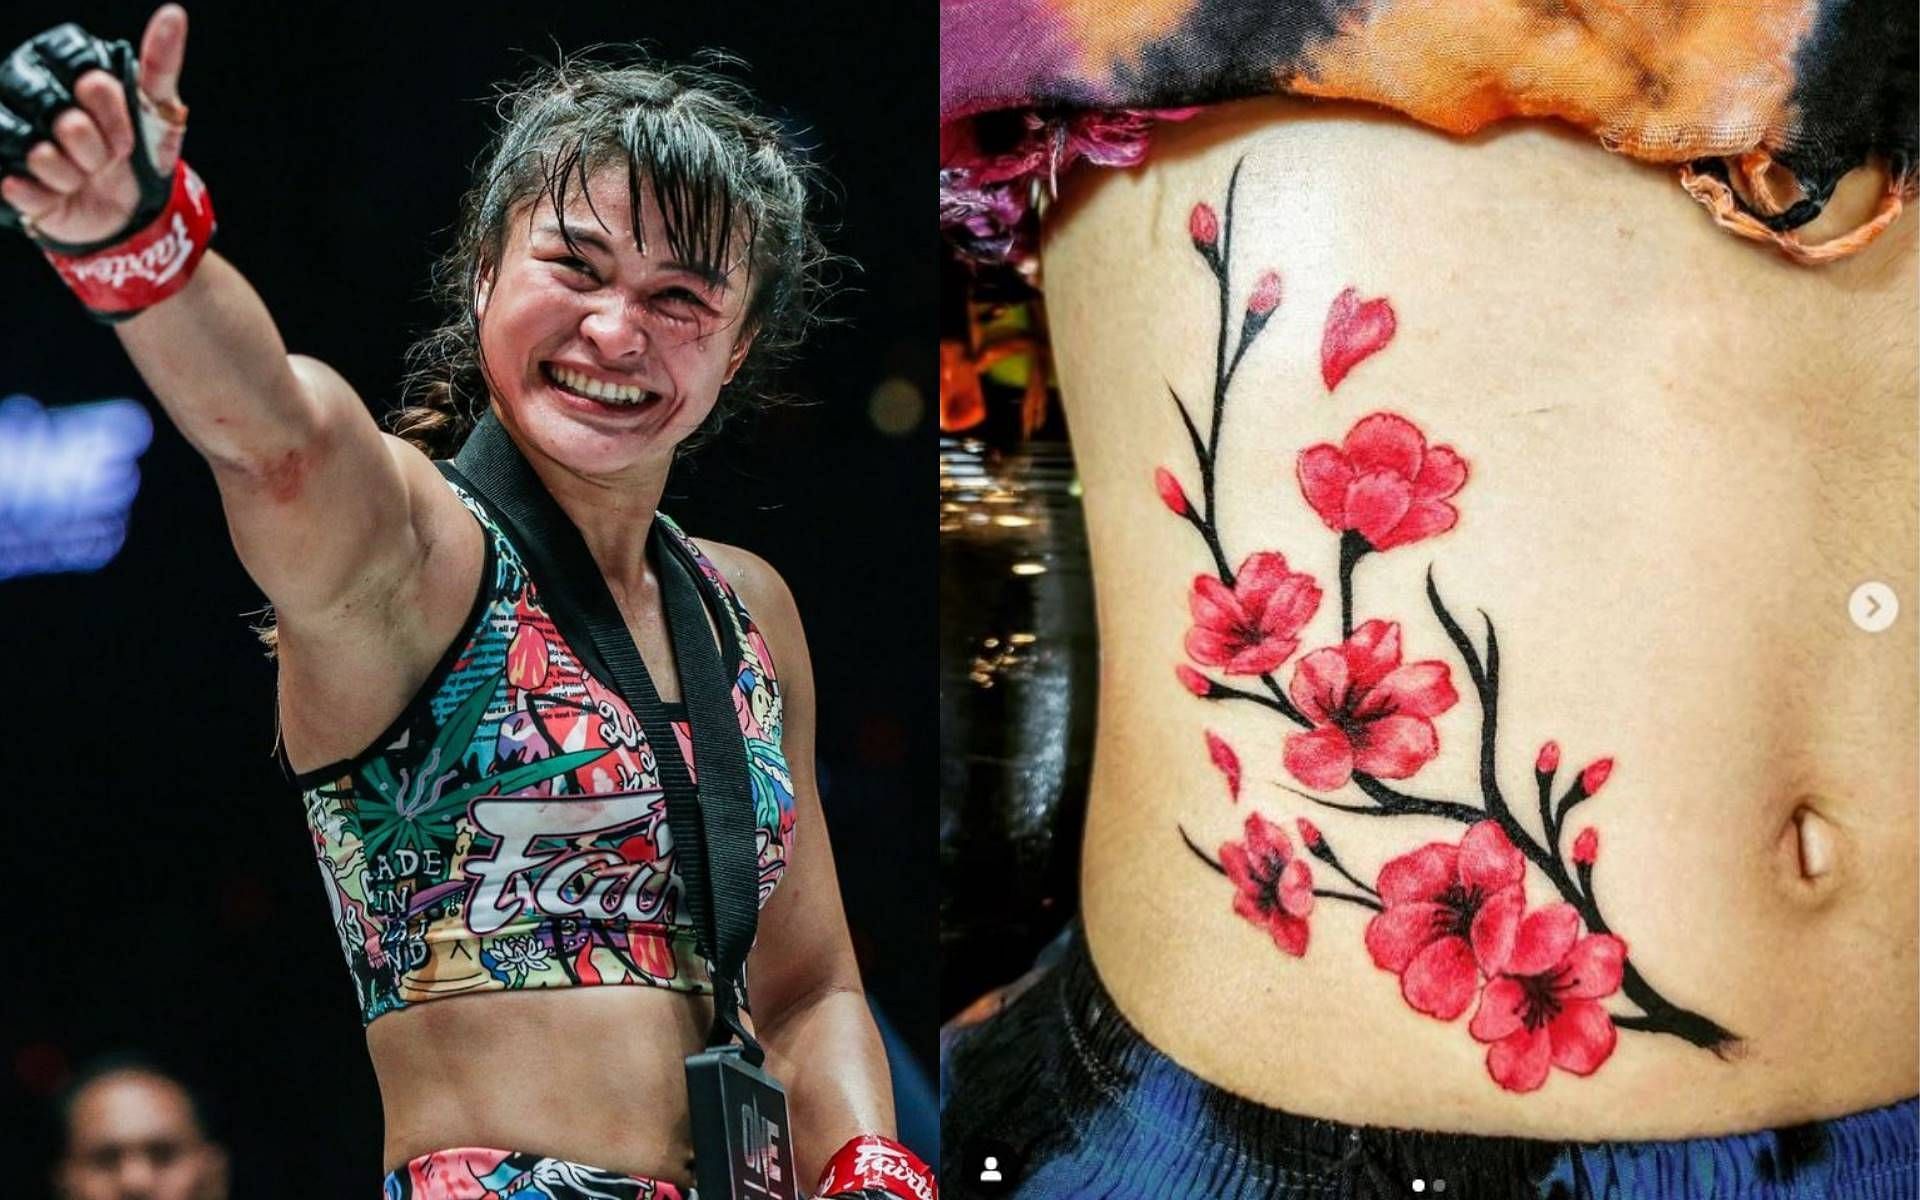 Stamp Fairtex (left) and her new tattoo (right) [Photos: ONE Championship, Instagram]